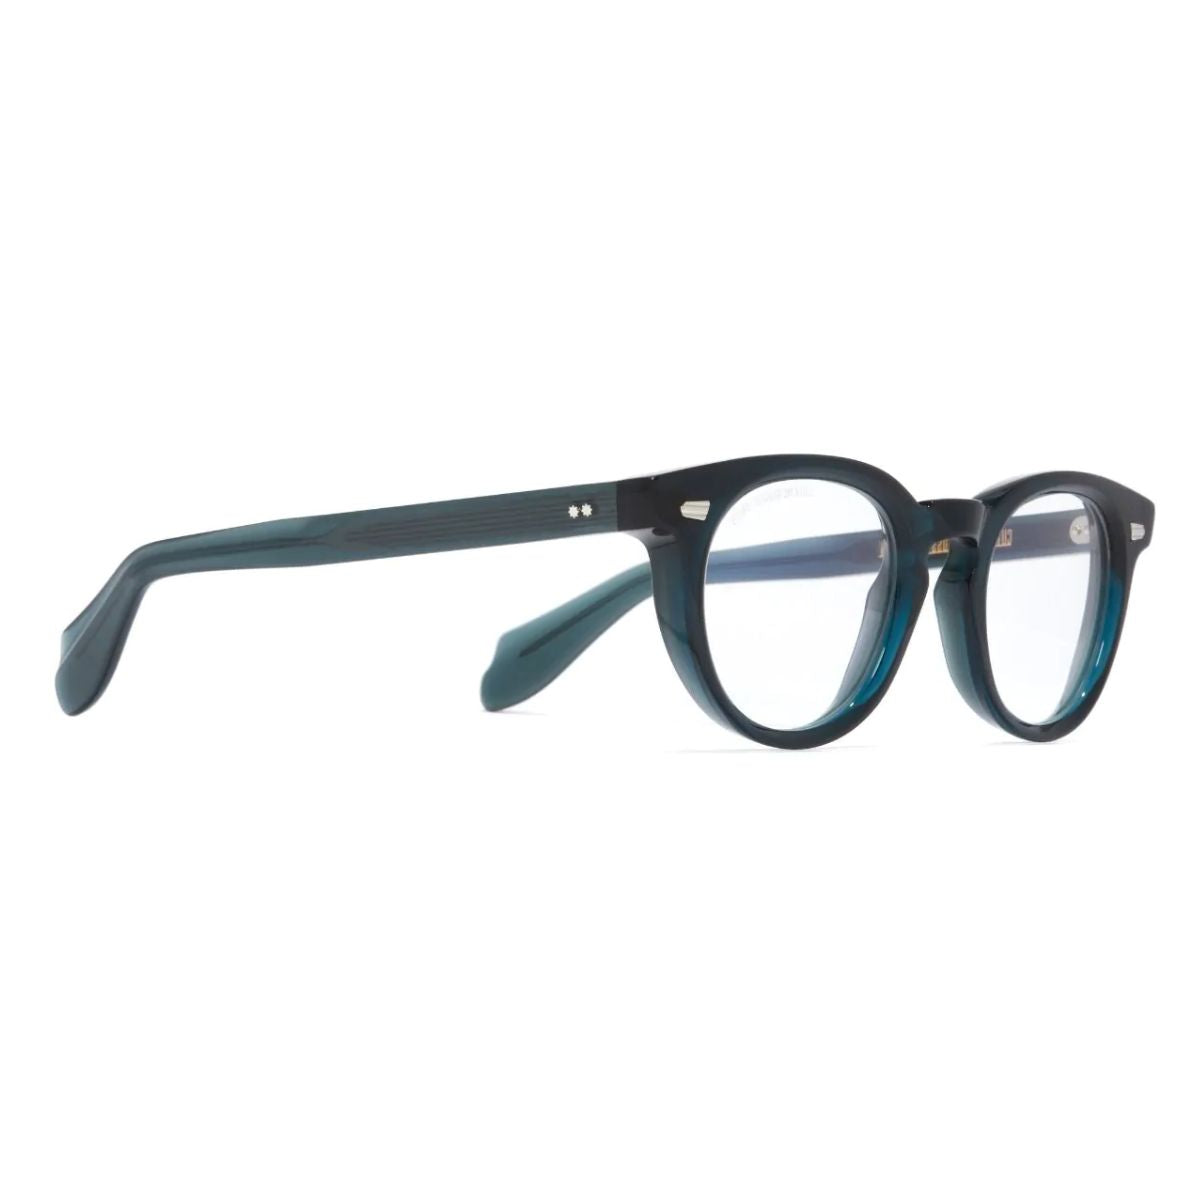 "Cutler & Gross 1405 03 Optical Frame For Mens and Womens at Optorium"